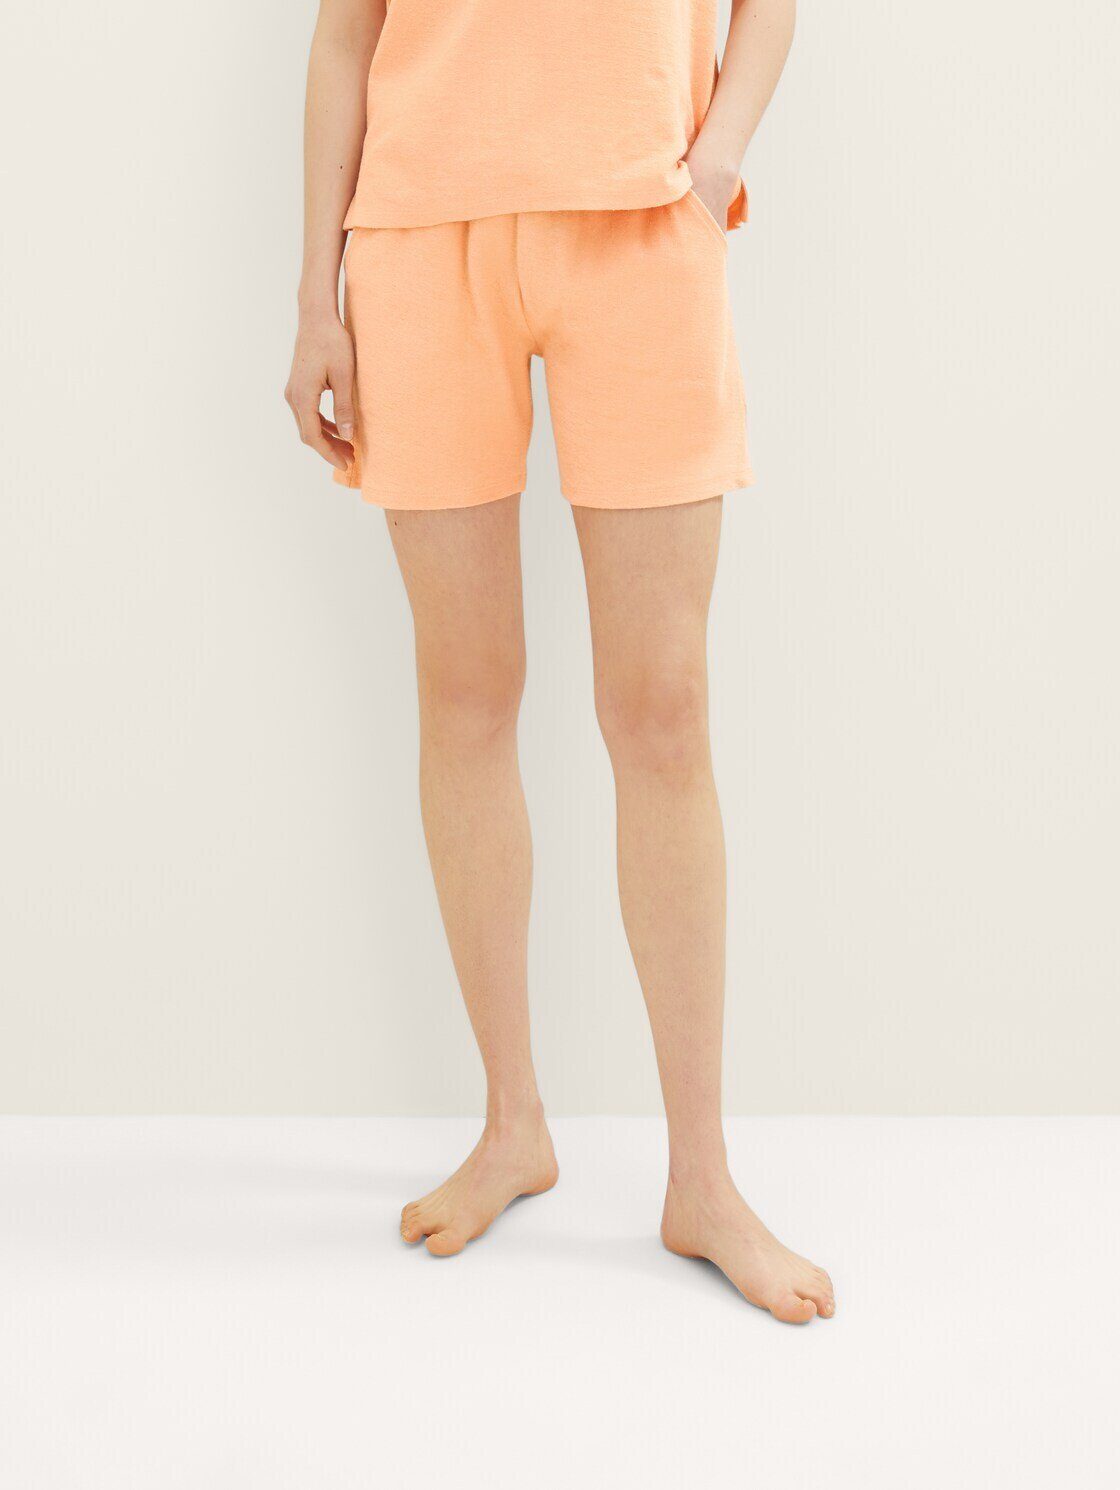 Schlafshorts Shorts TAILOR Frottee TOM